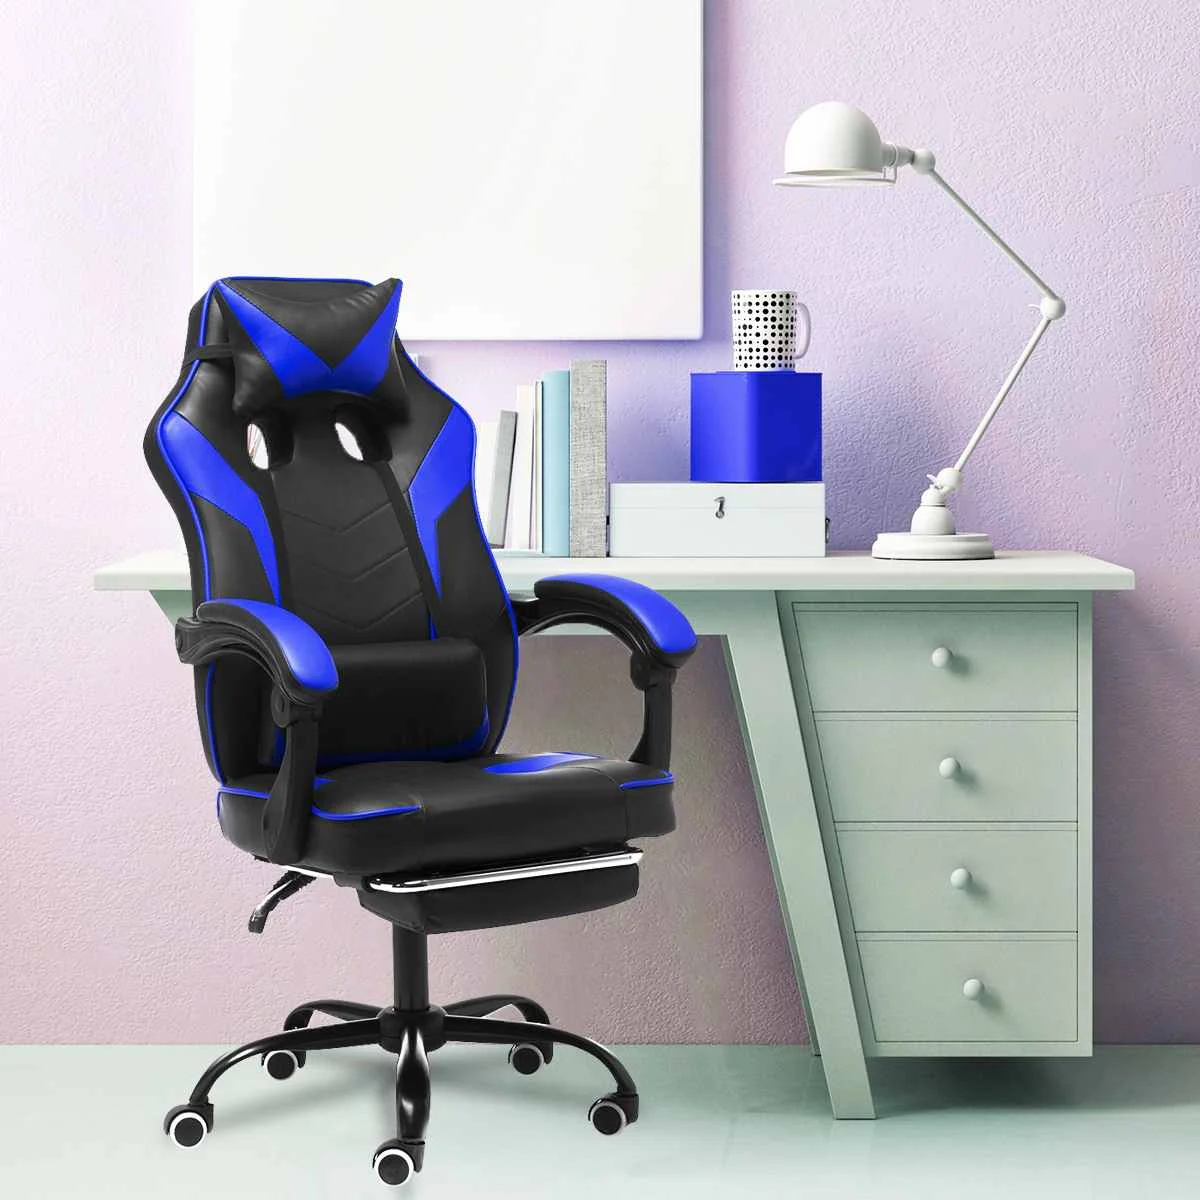 

Office Chair Gamer WCG Gaming Chair Home Internet Cafe Ergonomic Office Computer Chair Swivel Lifting Lying Footrest Desk Chair